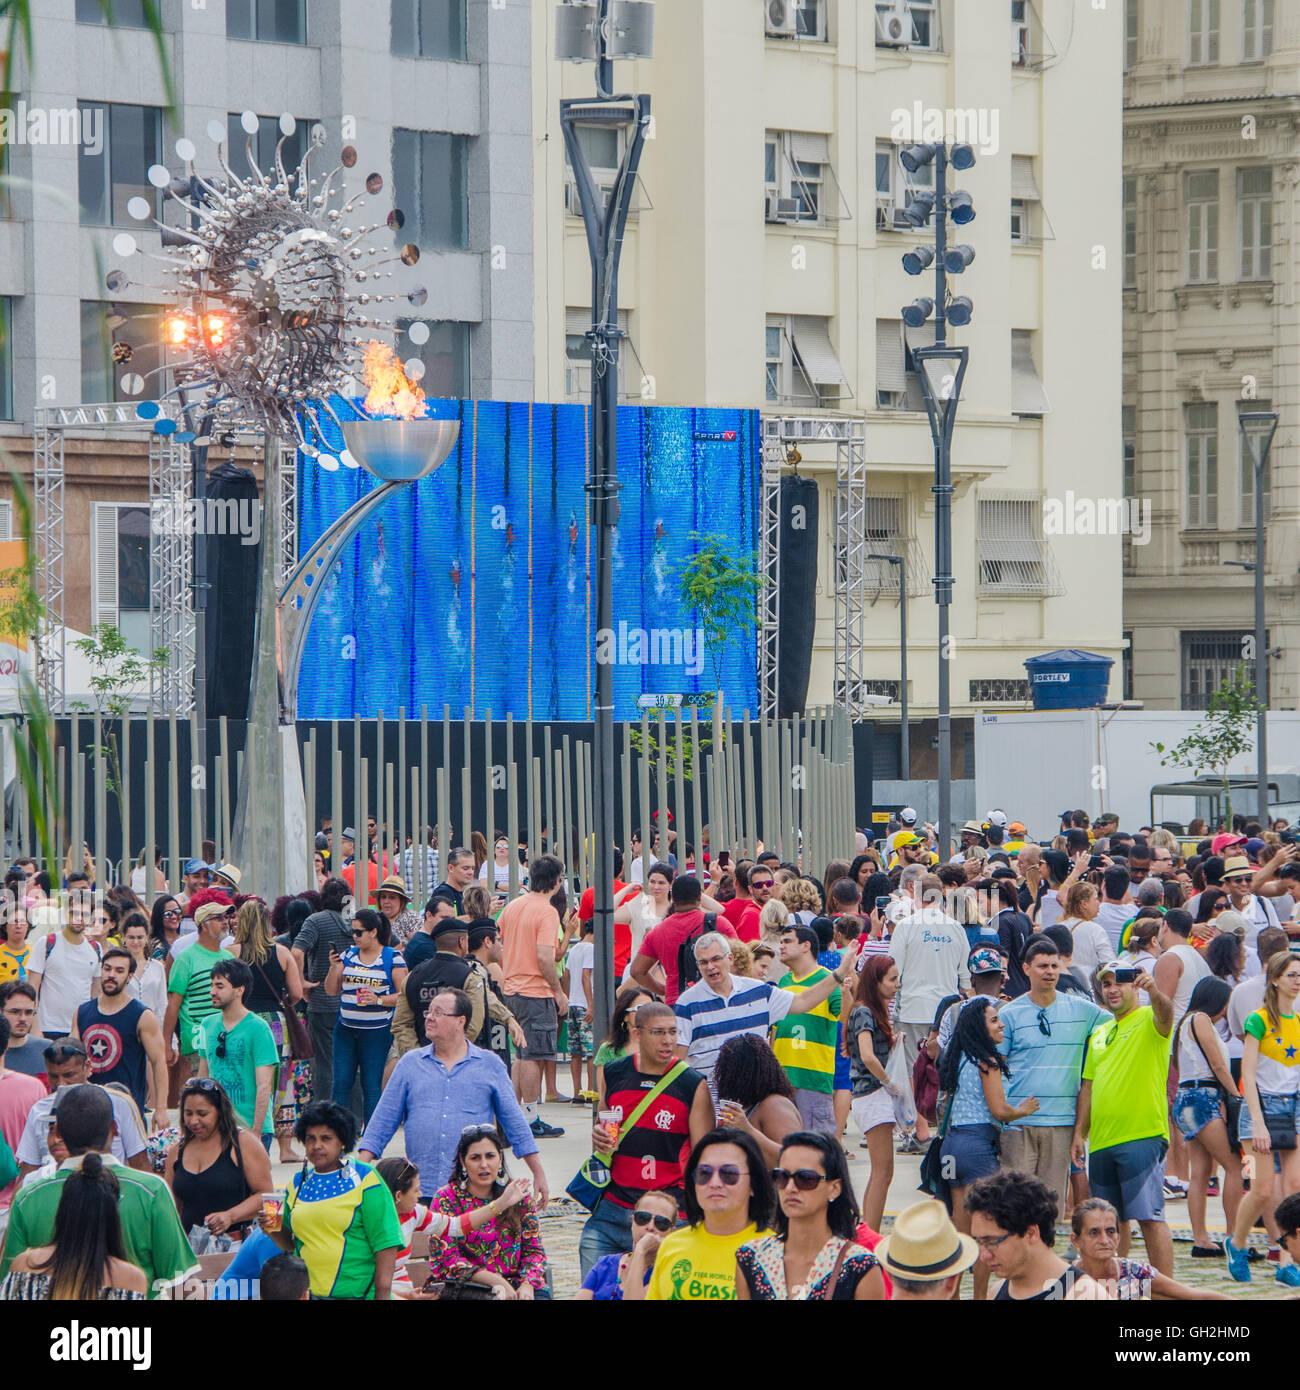 The Rio Olympic Cauldron for the 2016 Rio Games is situated in the Olympic Boulevard of the city. Stock Photo